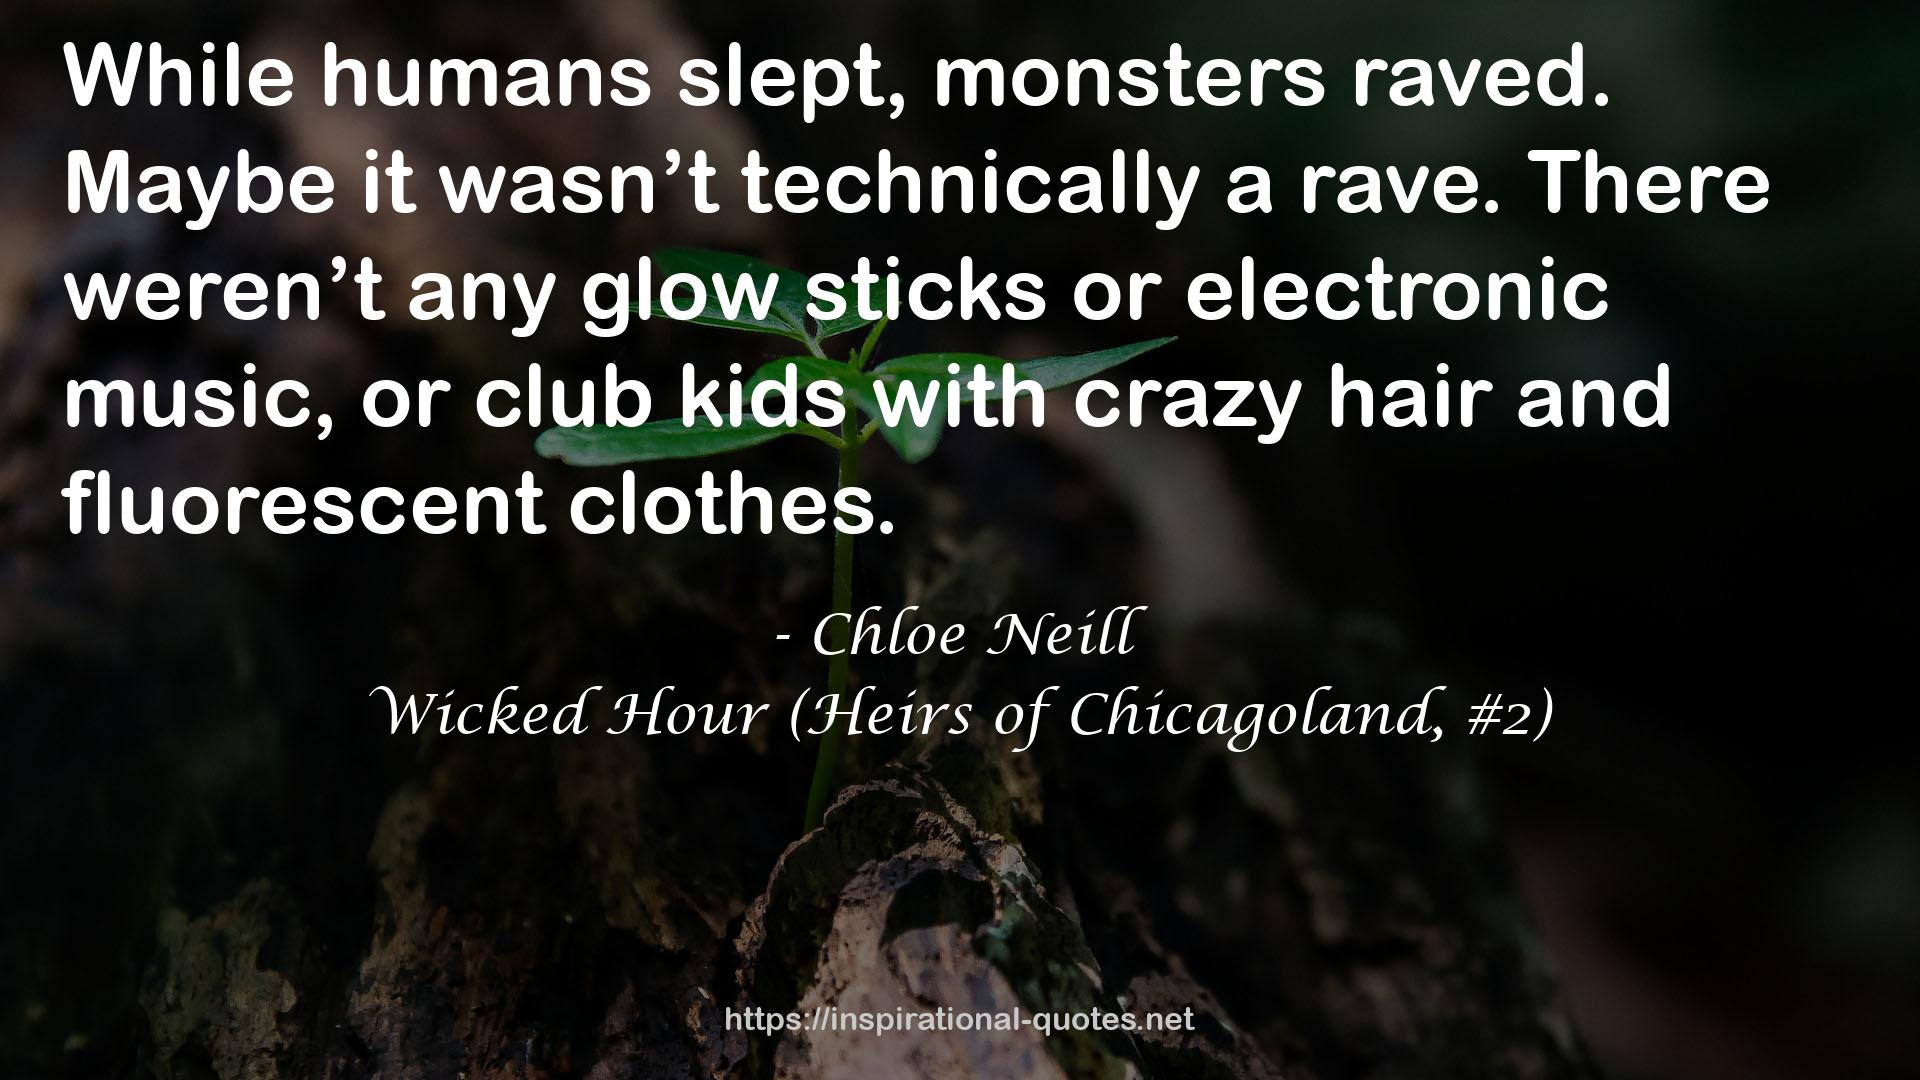 Wicked Hour (Heirs of Chicagoland, #2) QUOTES